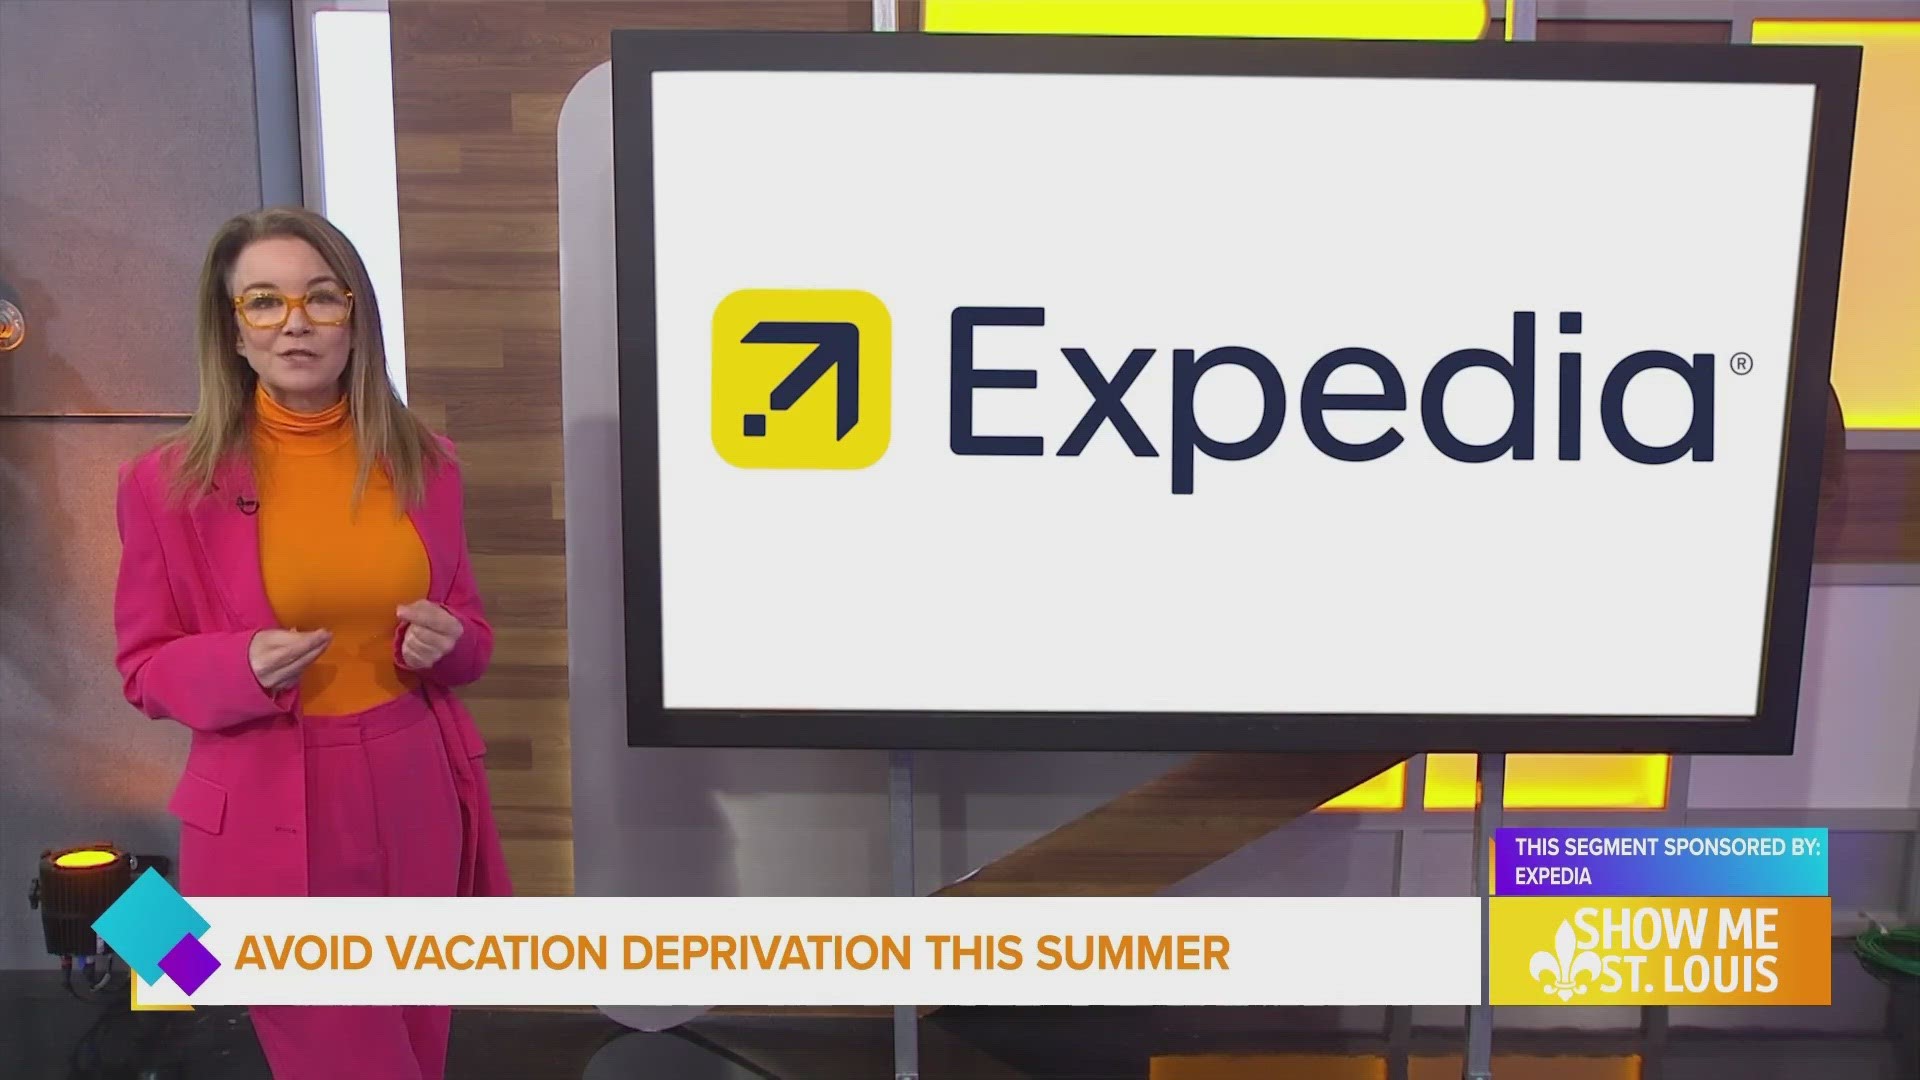 According to Expedia’s 23rd annual Vacation Deprivation Report, global vacation deprivation levels are the highest they’ve been in 10 years.